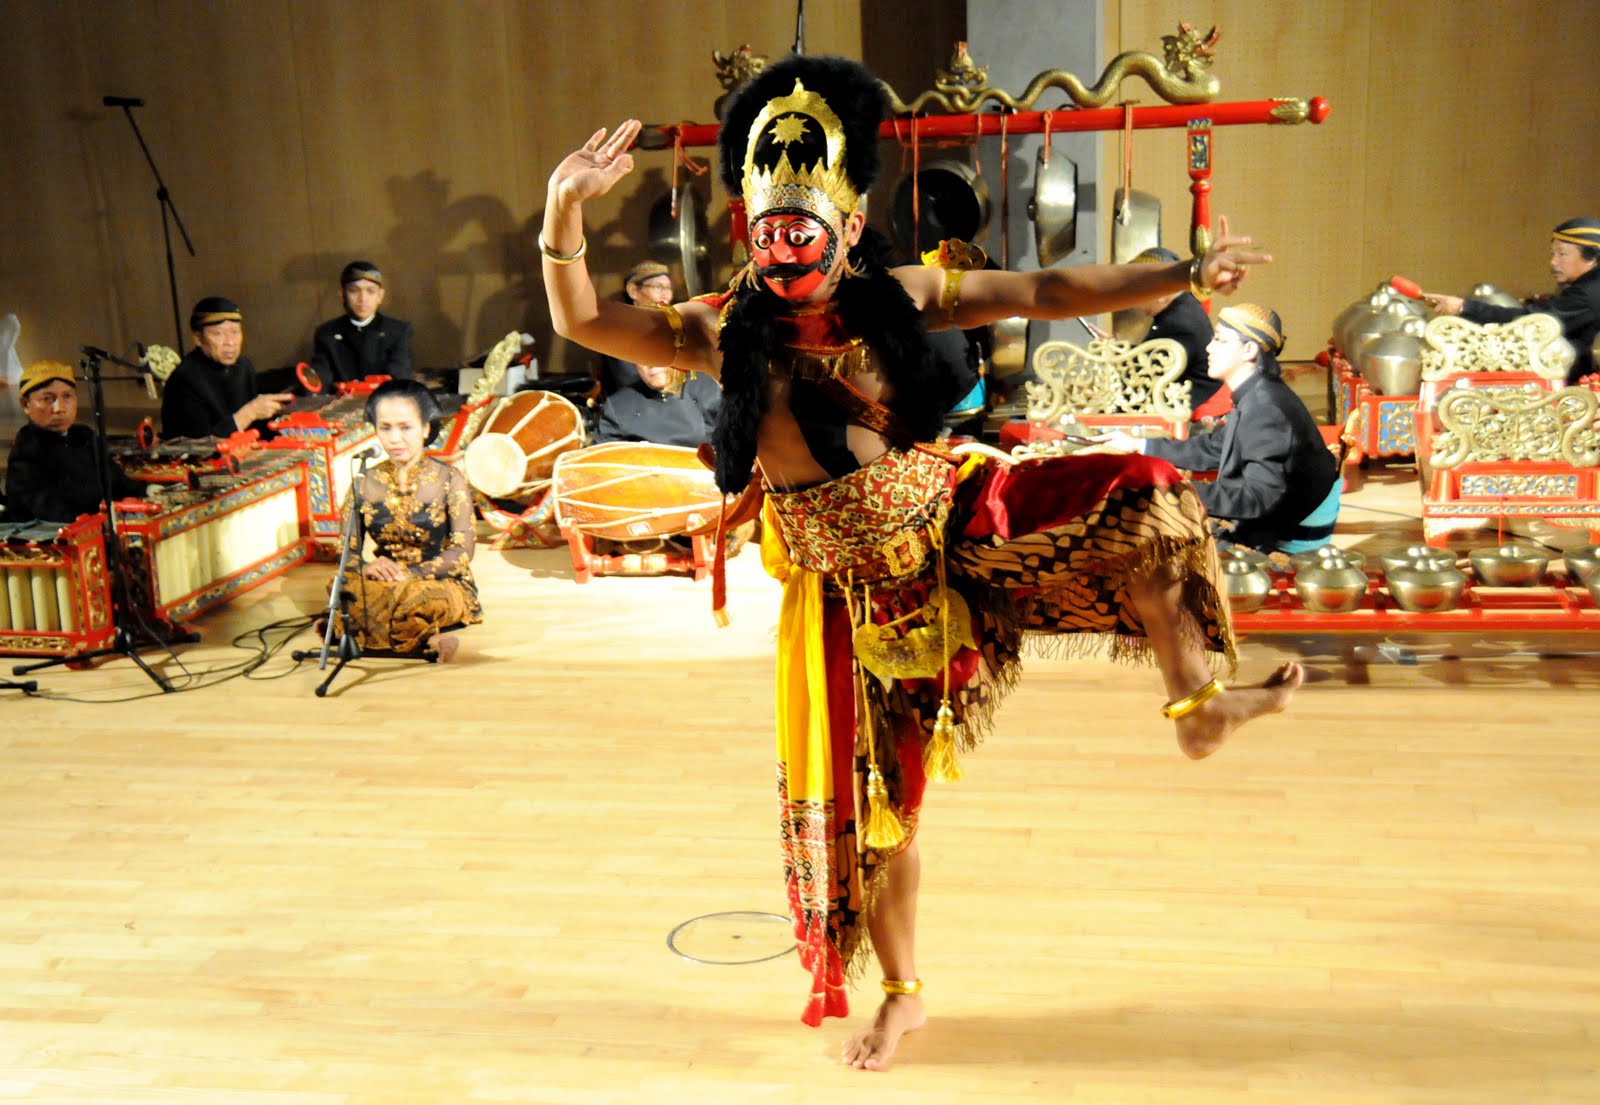 Indonesian music and dance